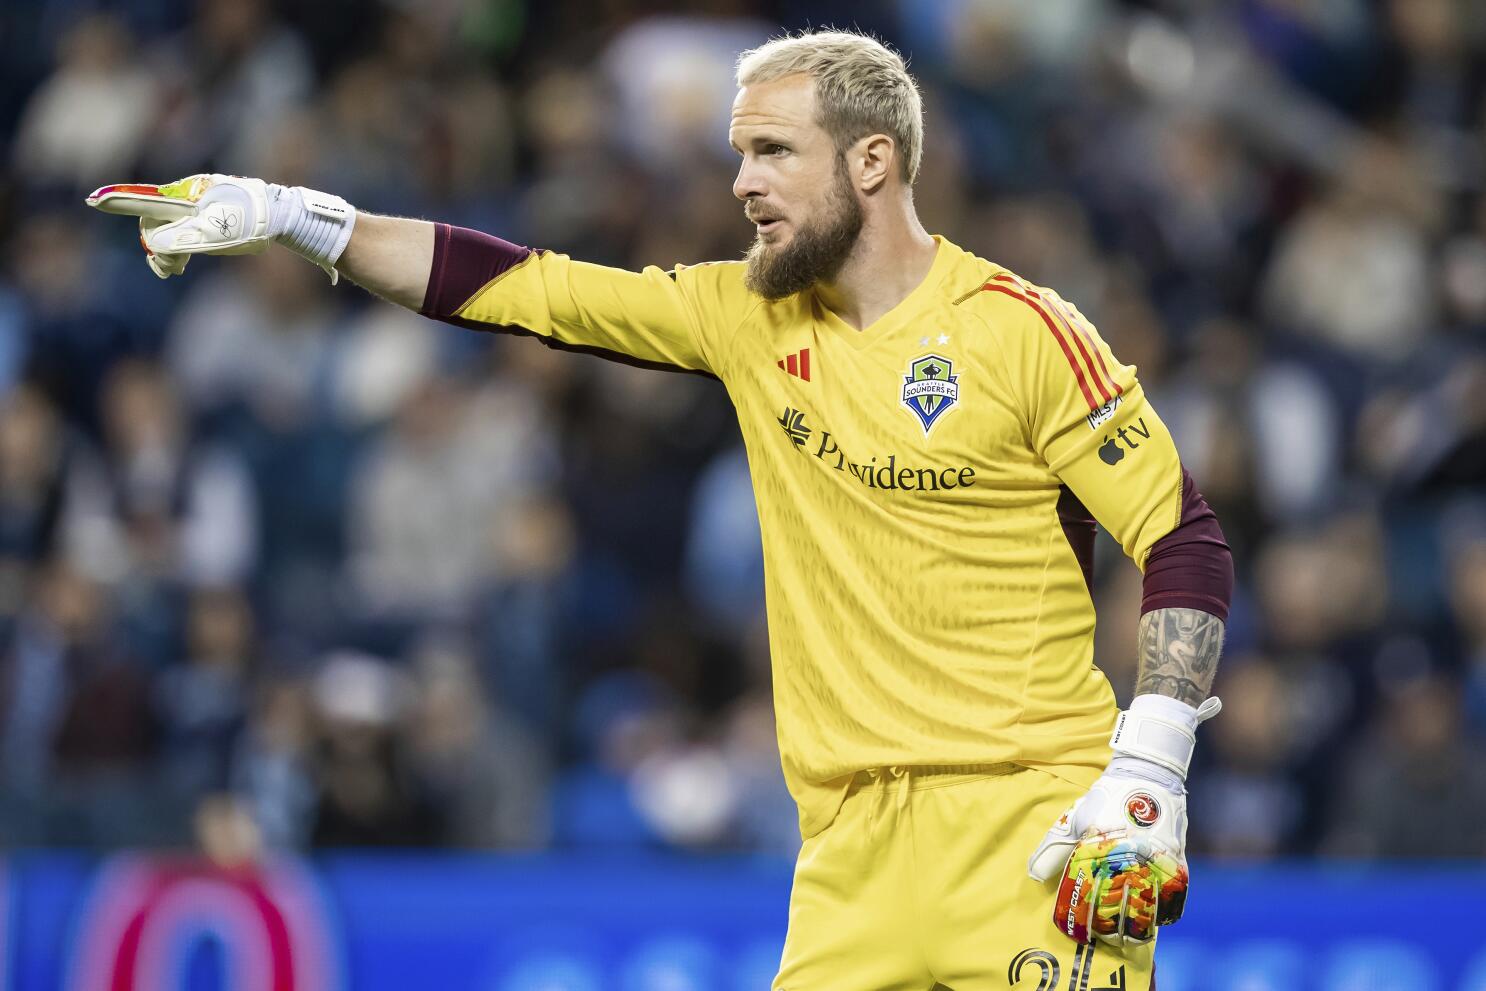 LA Galaxy fall to Sounders for fifth consecutive loss without